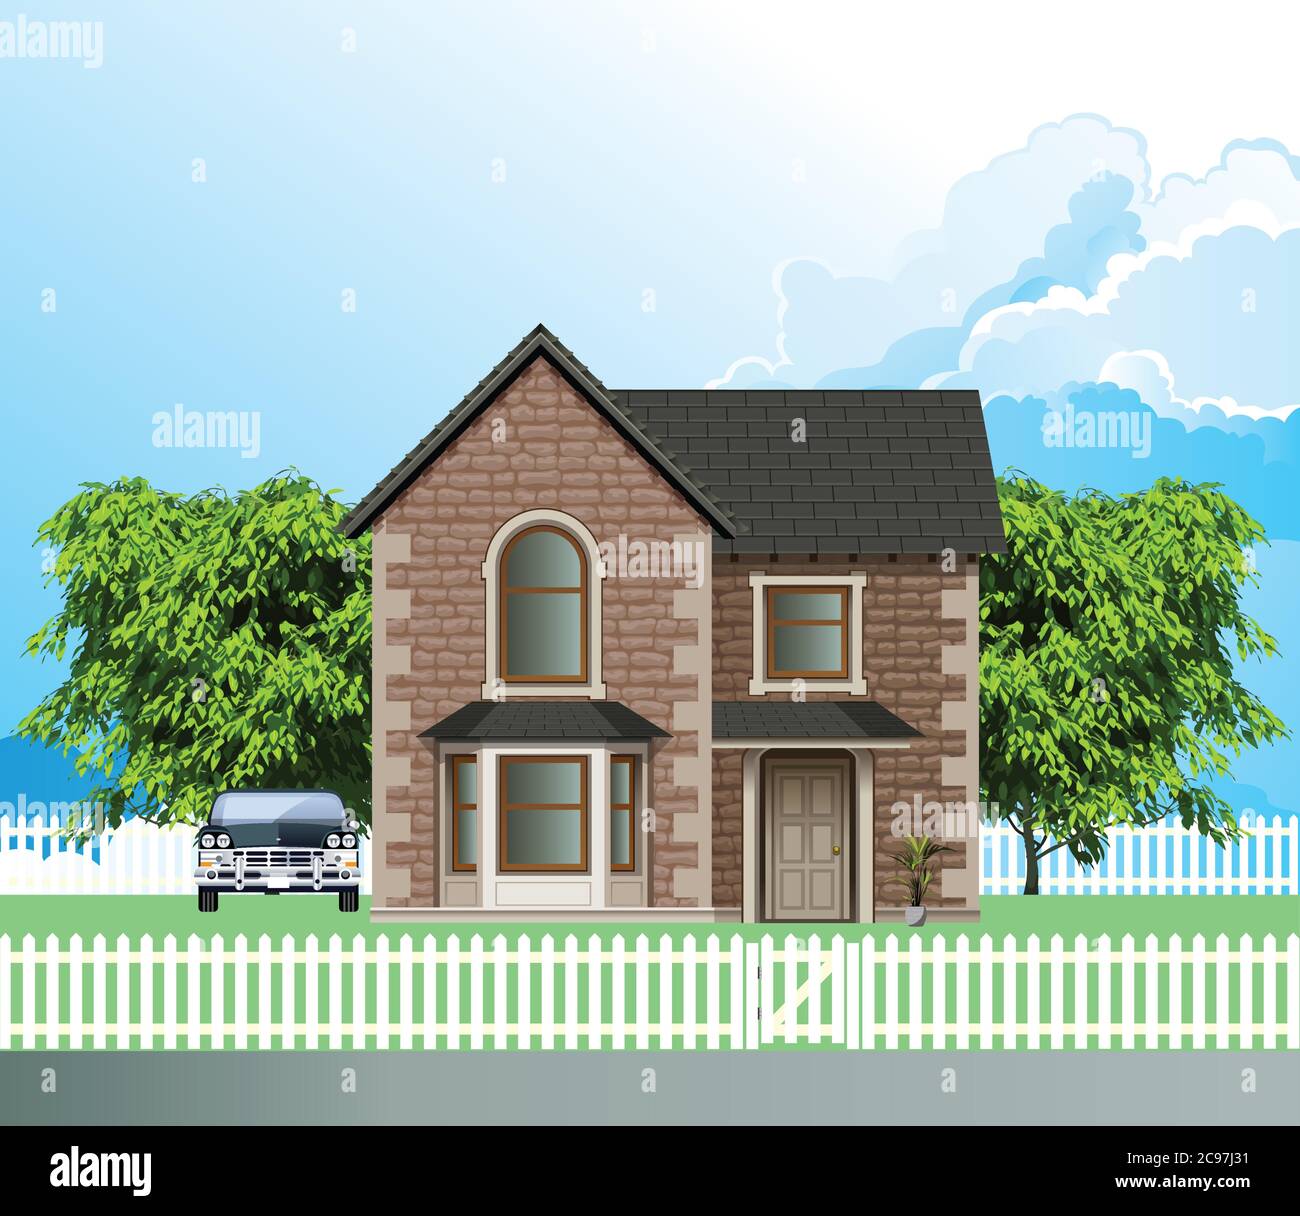 Detached residential house on a suburb street with white picket fence and gate set against a blue cloudy sky Stock Vector